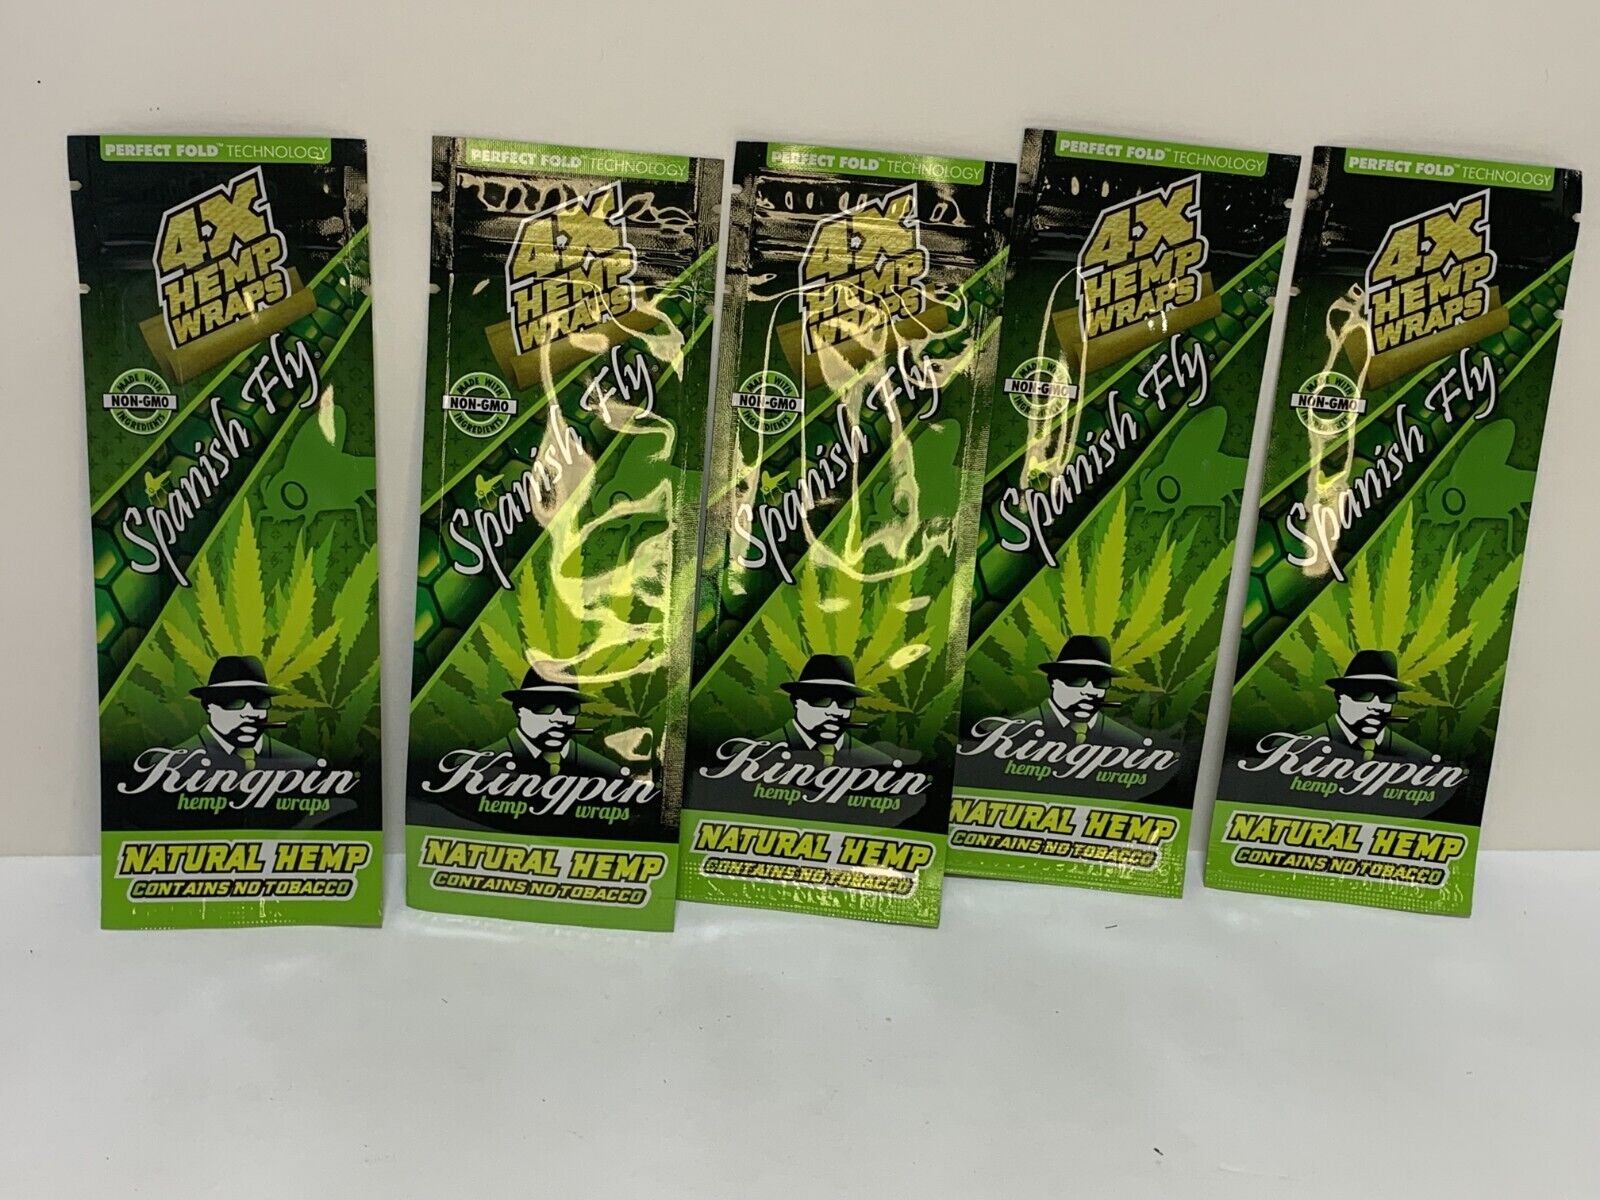 KINGPIN HERBAL WRAPS - SPANISH F. Flavor/ 5 PACKS/ 4 toasted wraps per pack